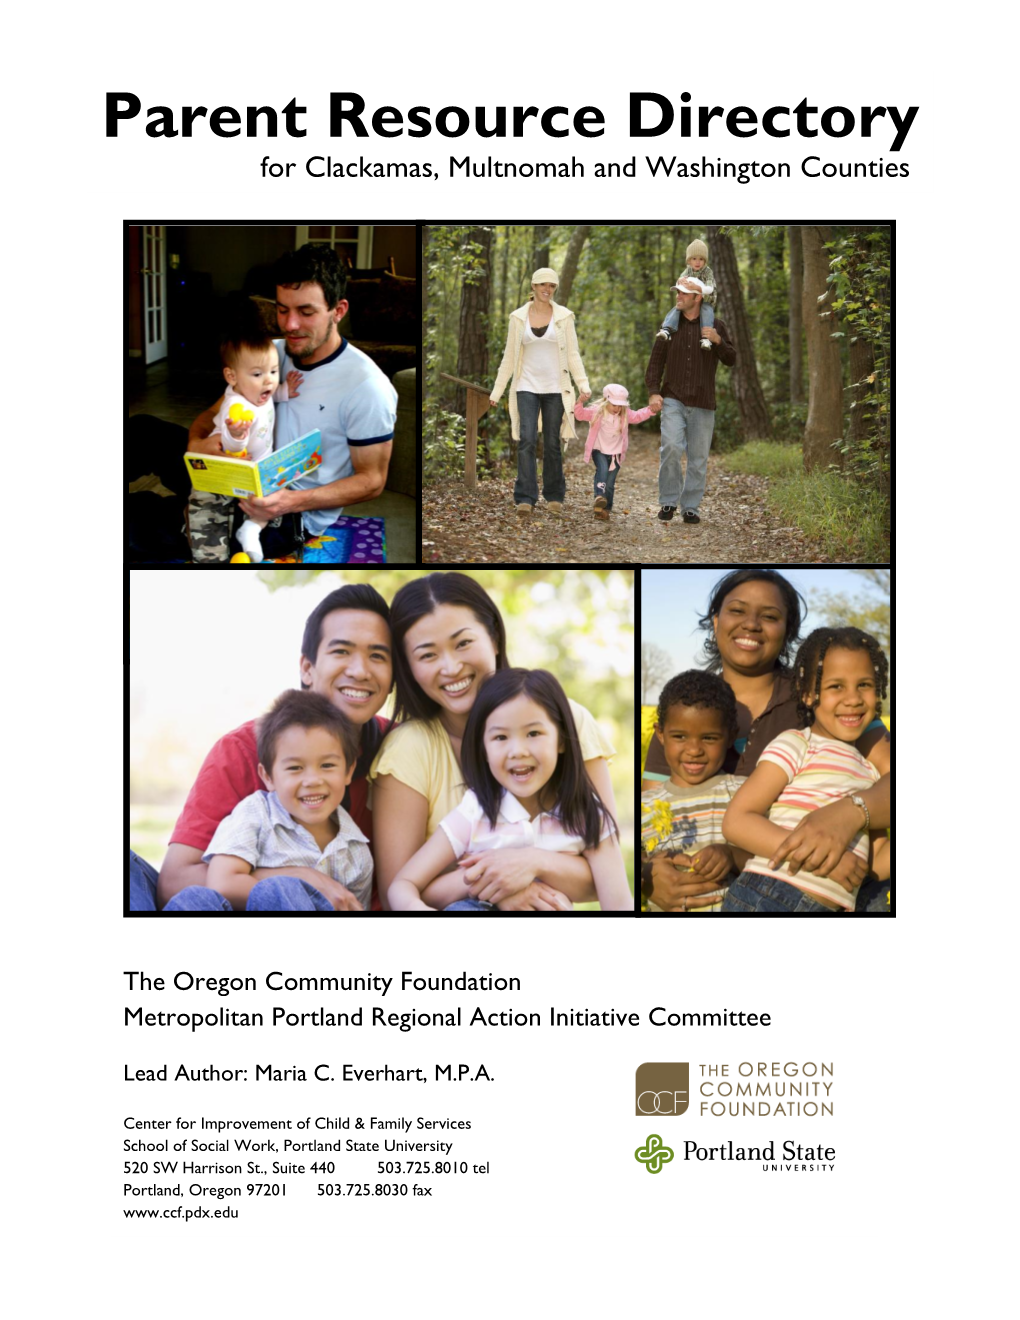 Parent Resource Directory for Clackamas, Multnomah and Washington Counties